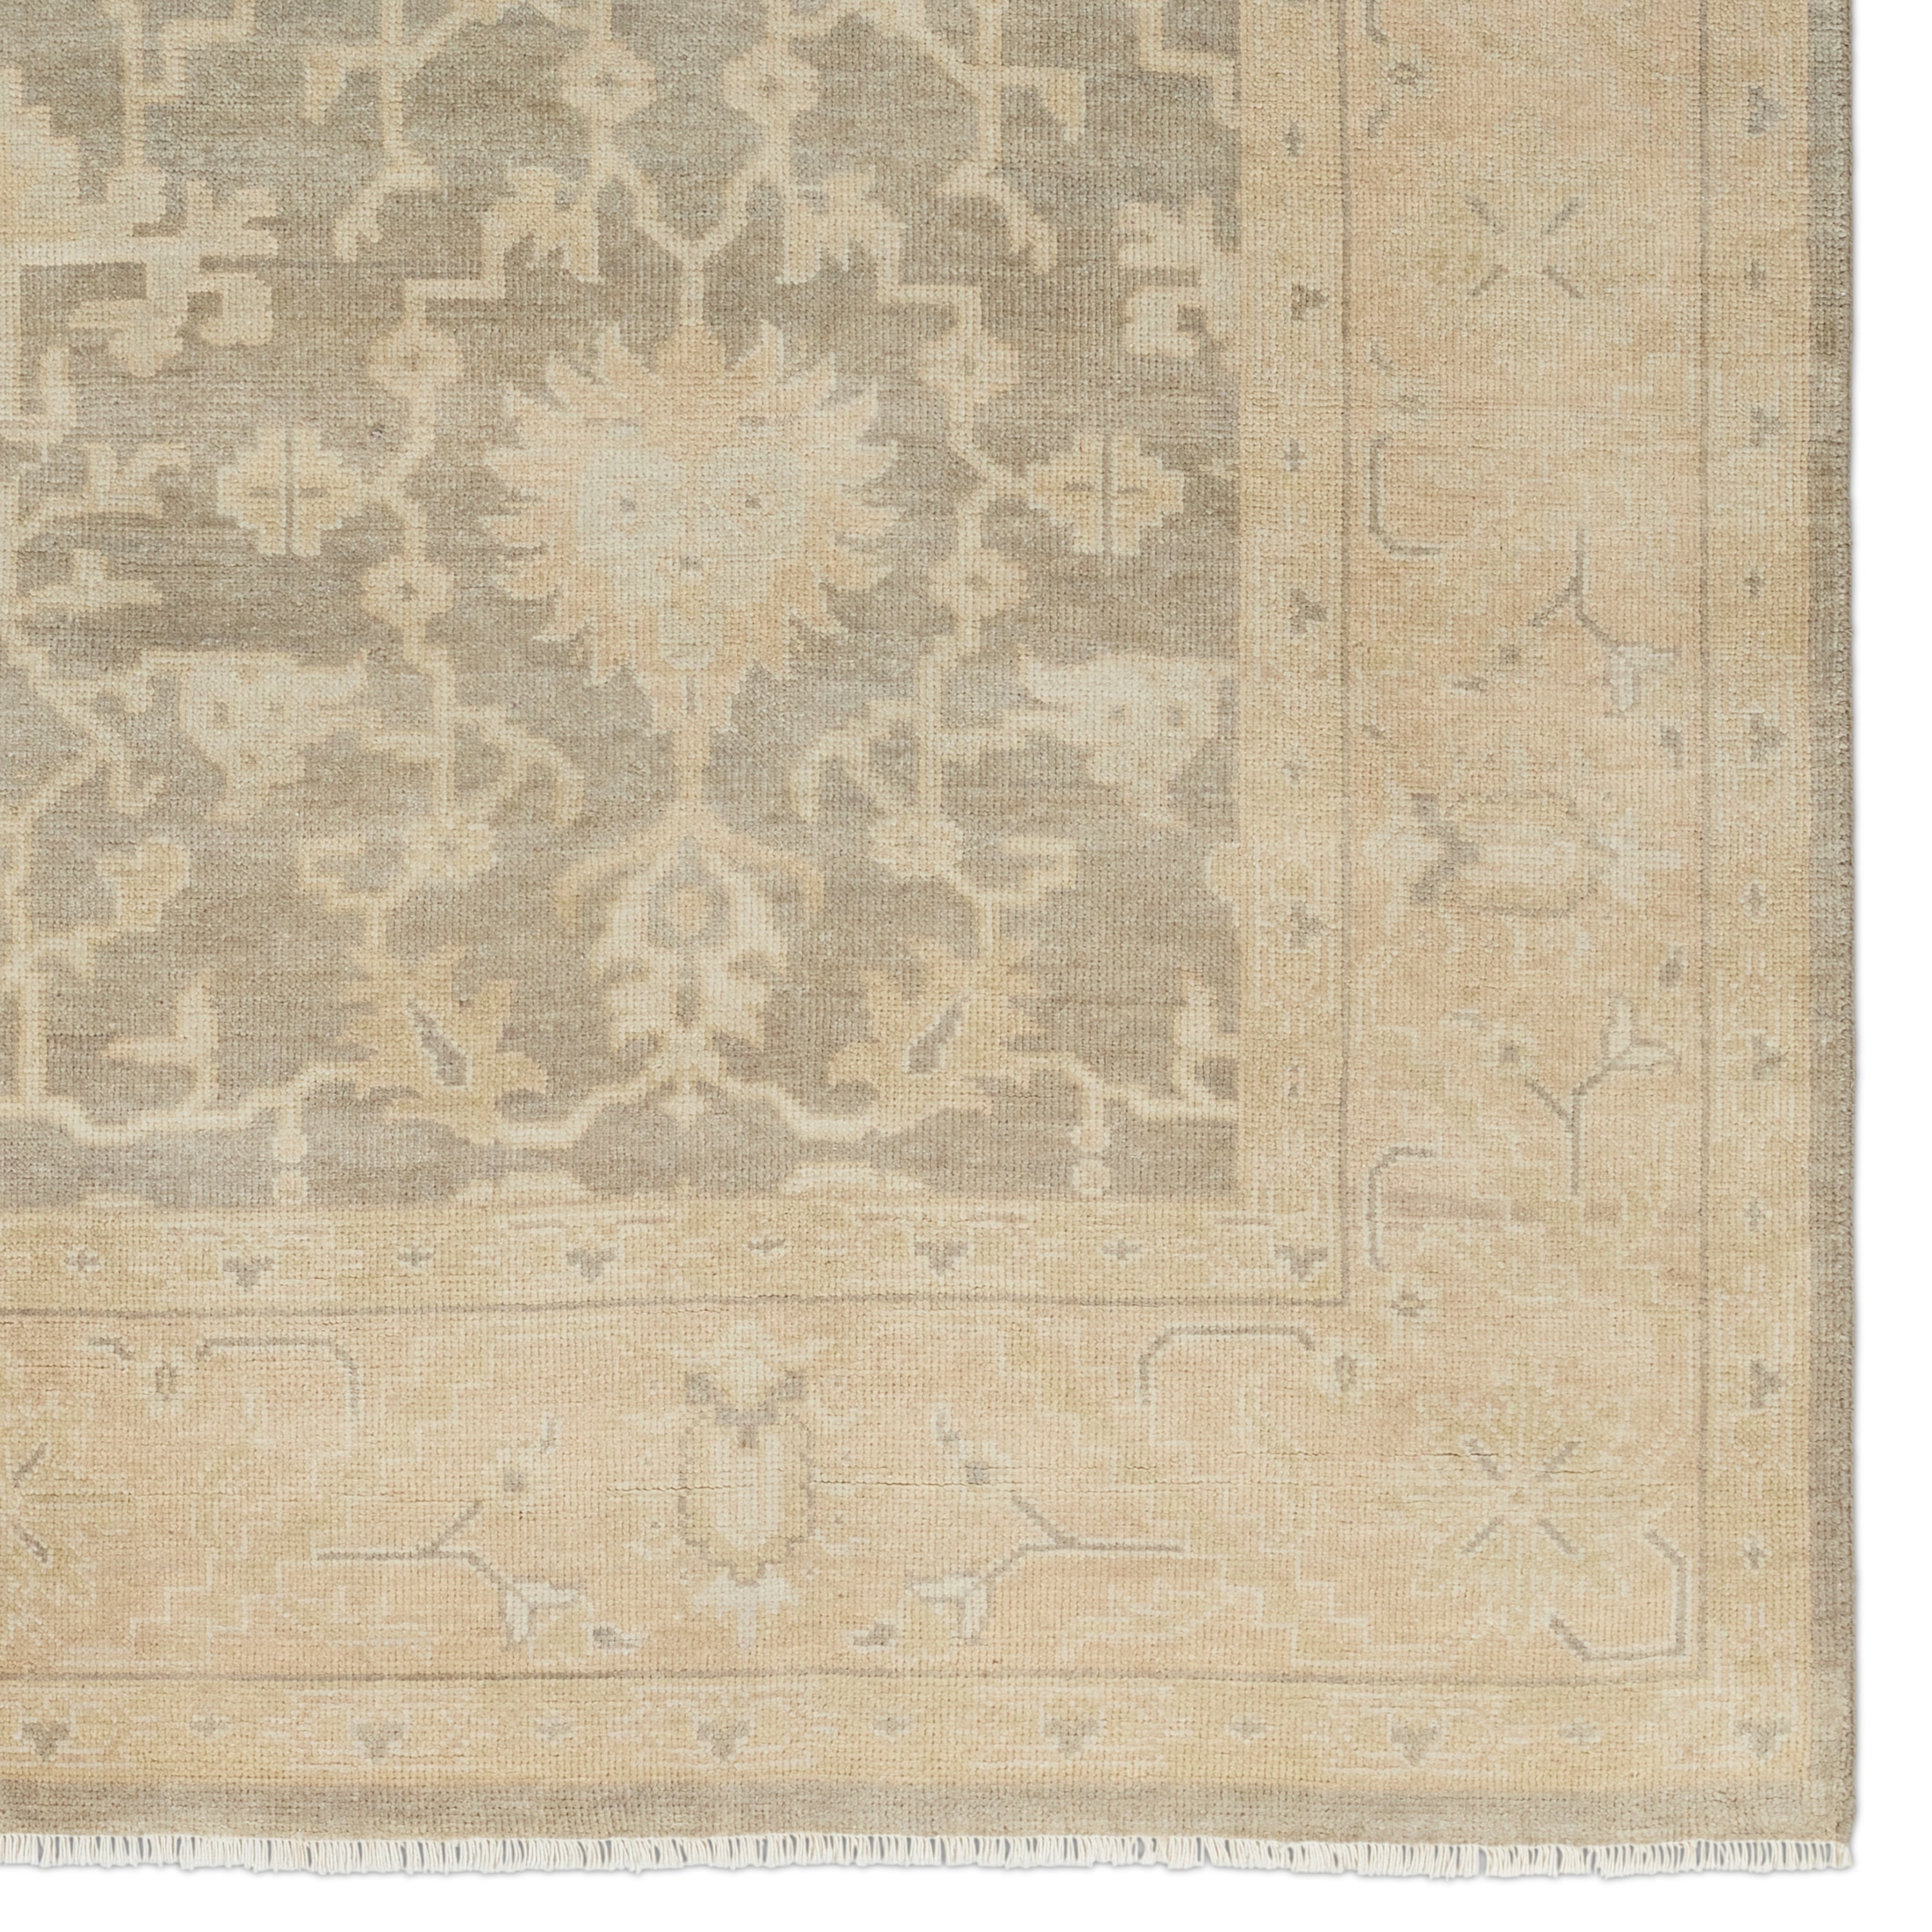 The Eloquent collection emanates traditional elegance, lending a soft and serene look to transitional homes. The Verity area rug features a faded Oushak design in muted beige, light gray, and tan tones. This hand-knotted wool and viscose rug grounds living spaces with a classic, earthy look. Amethyst Home provides interior design, new construction, custom furniture, and area rugs in the Newport Beach metro area.